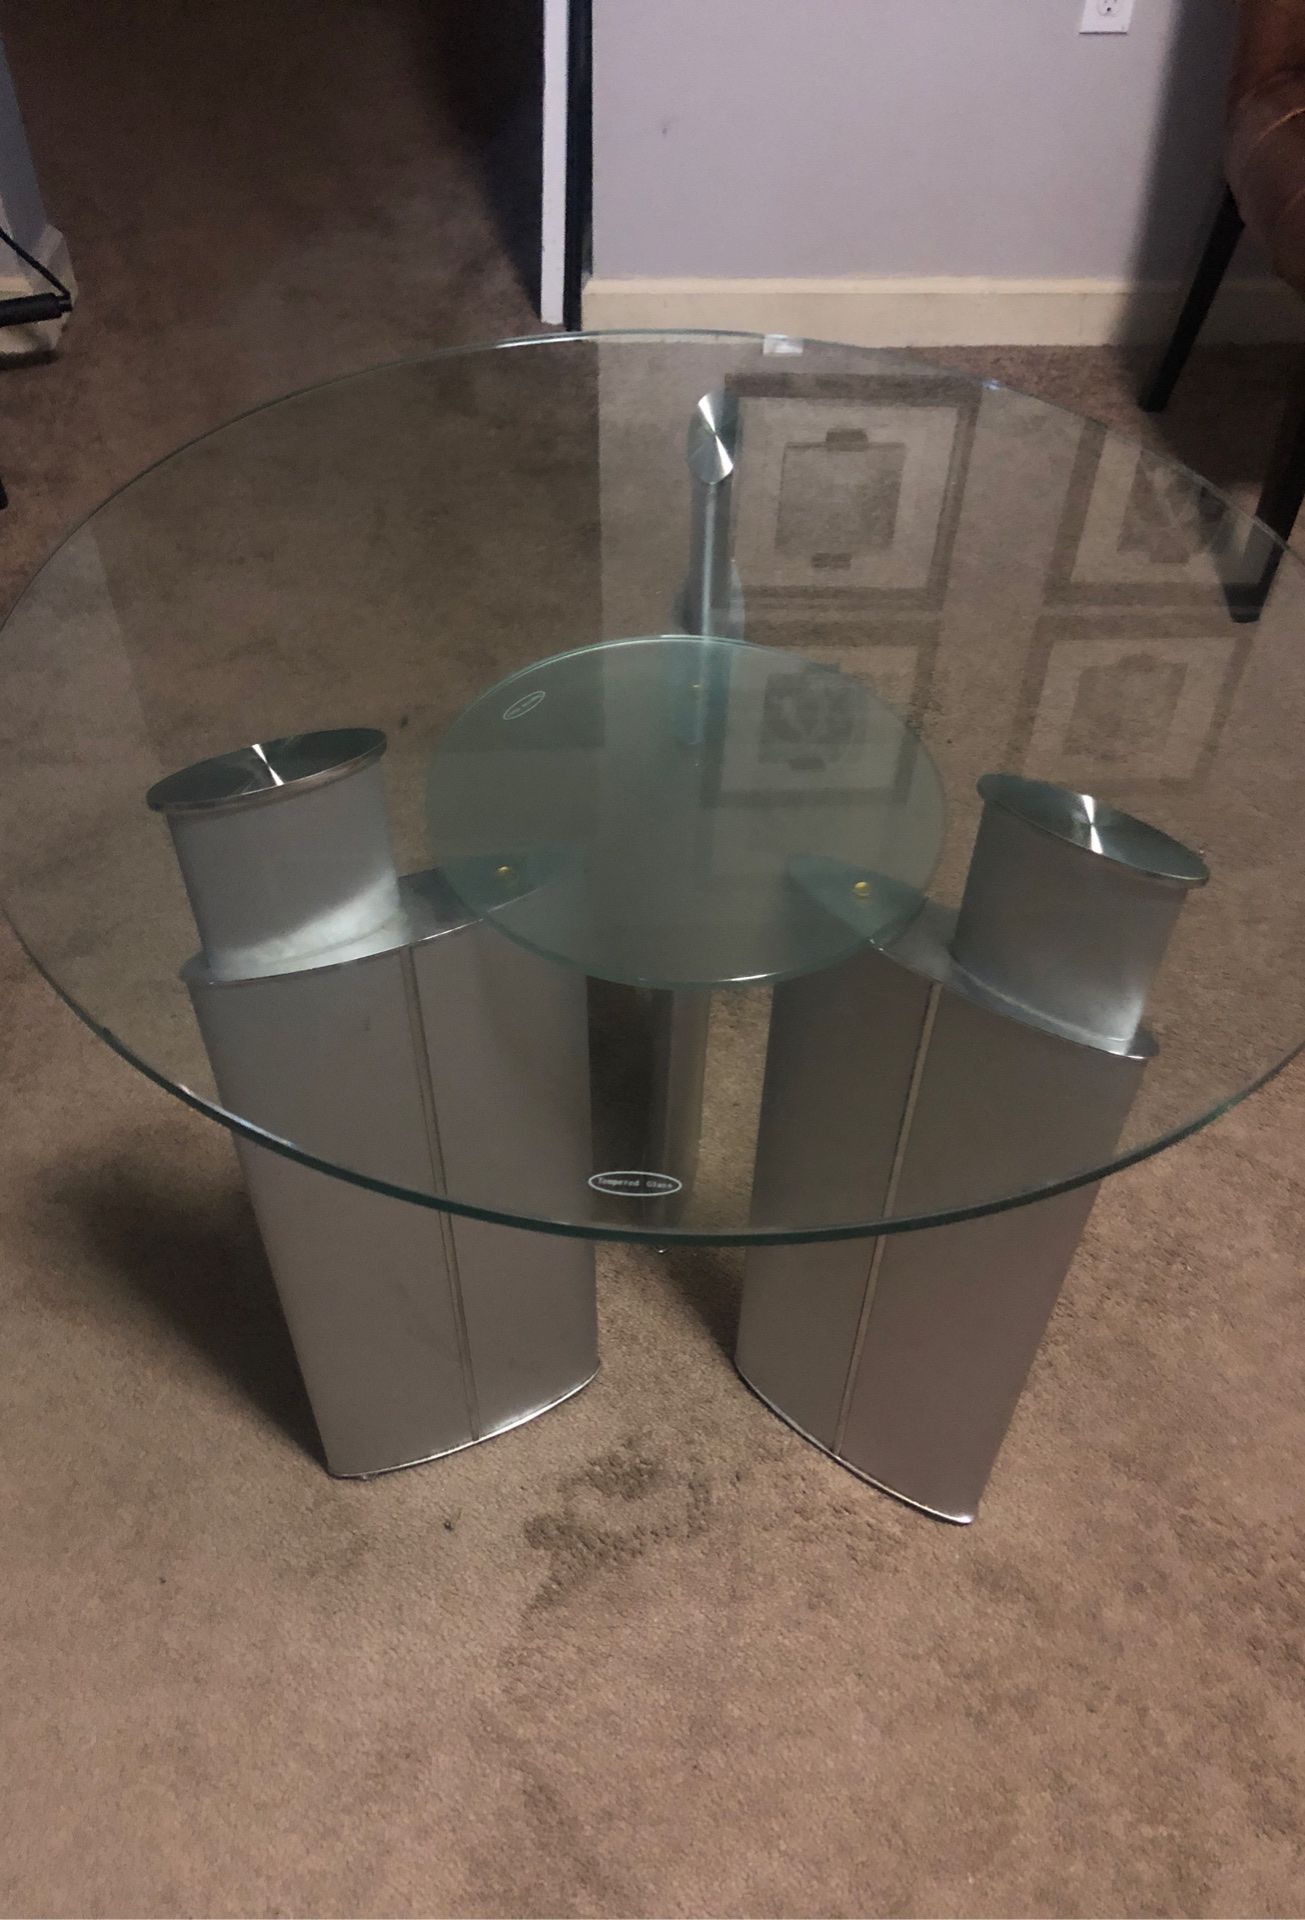 Console table tempered glass, silver metal holder $80